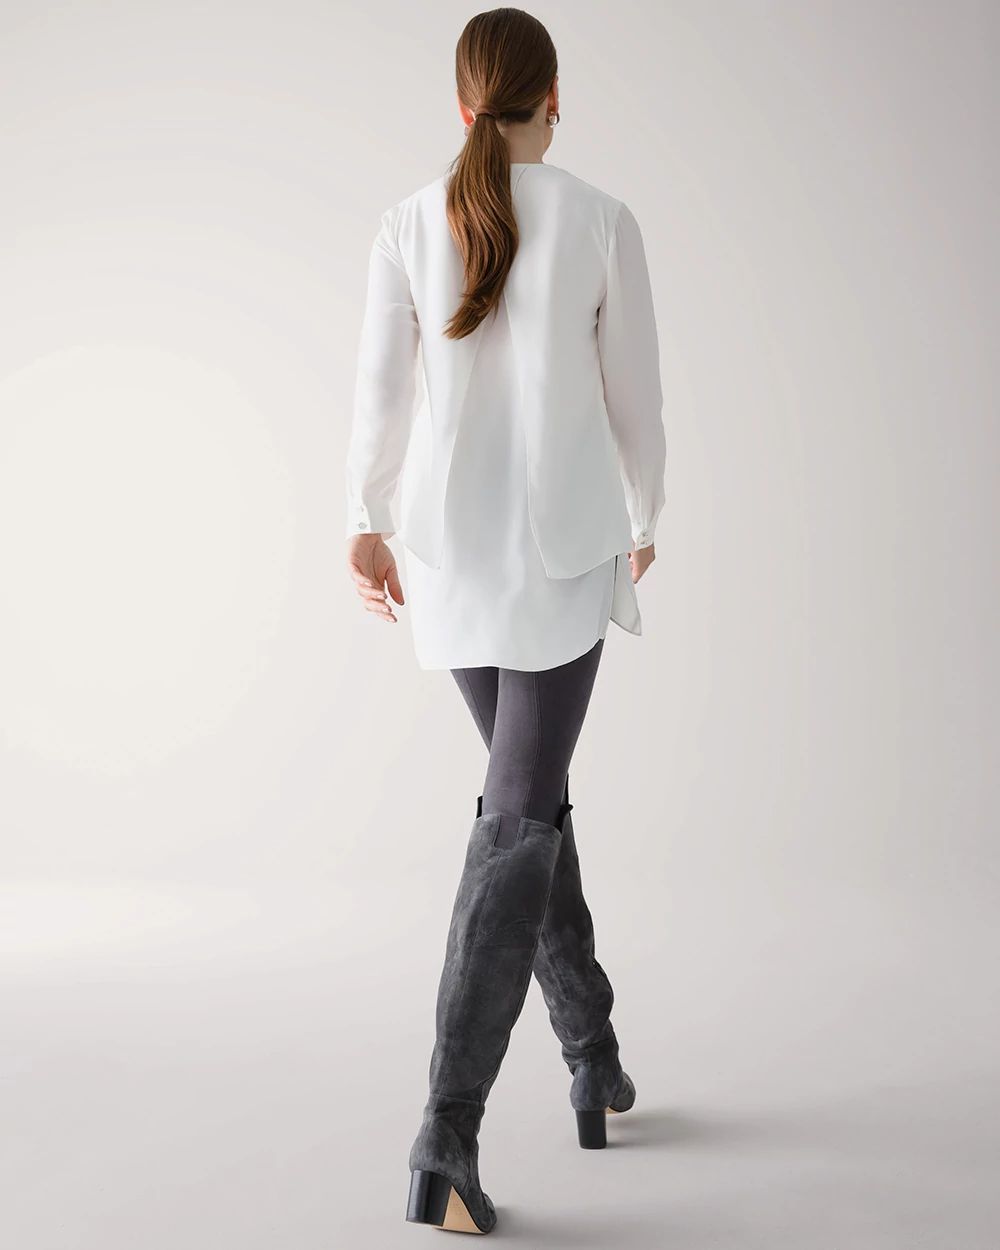 Long Sleeve V-Neck Tunic click to view larger image.